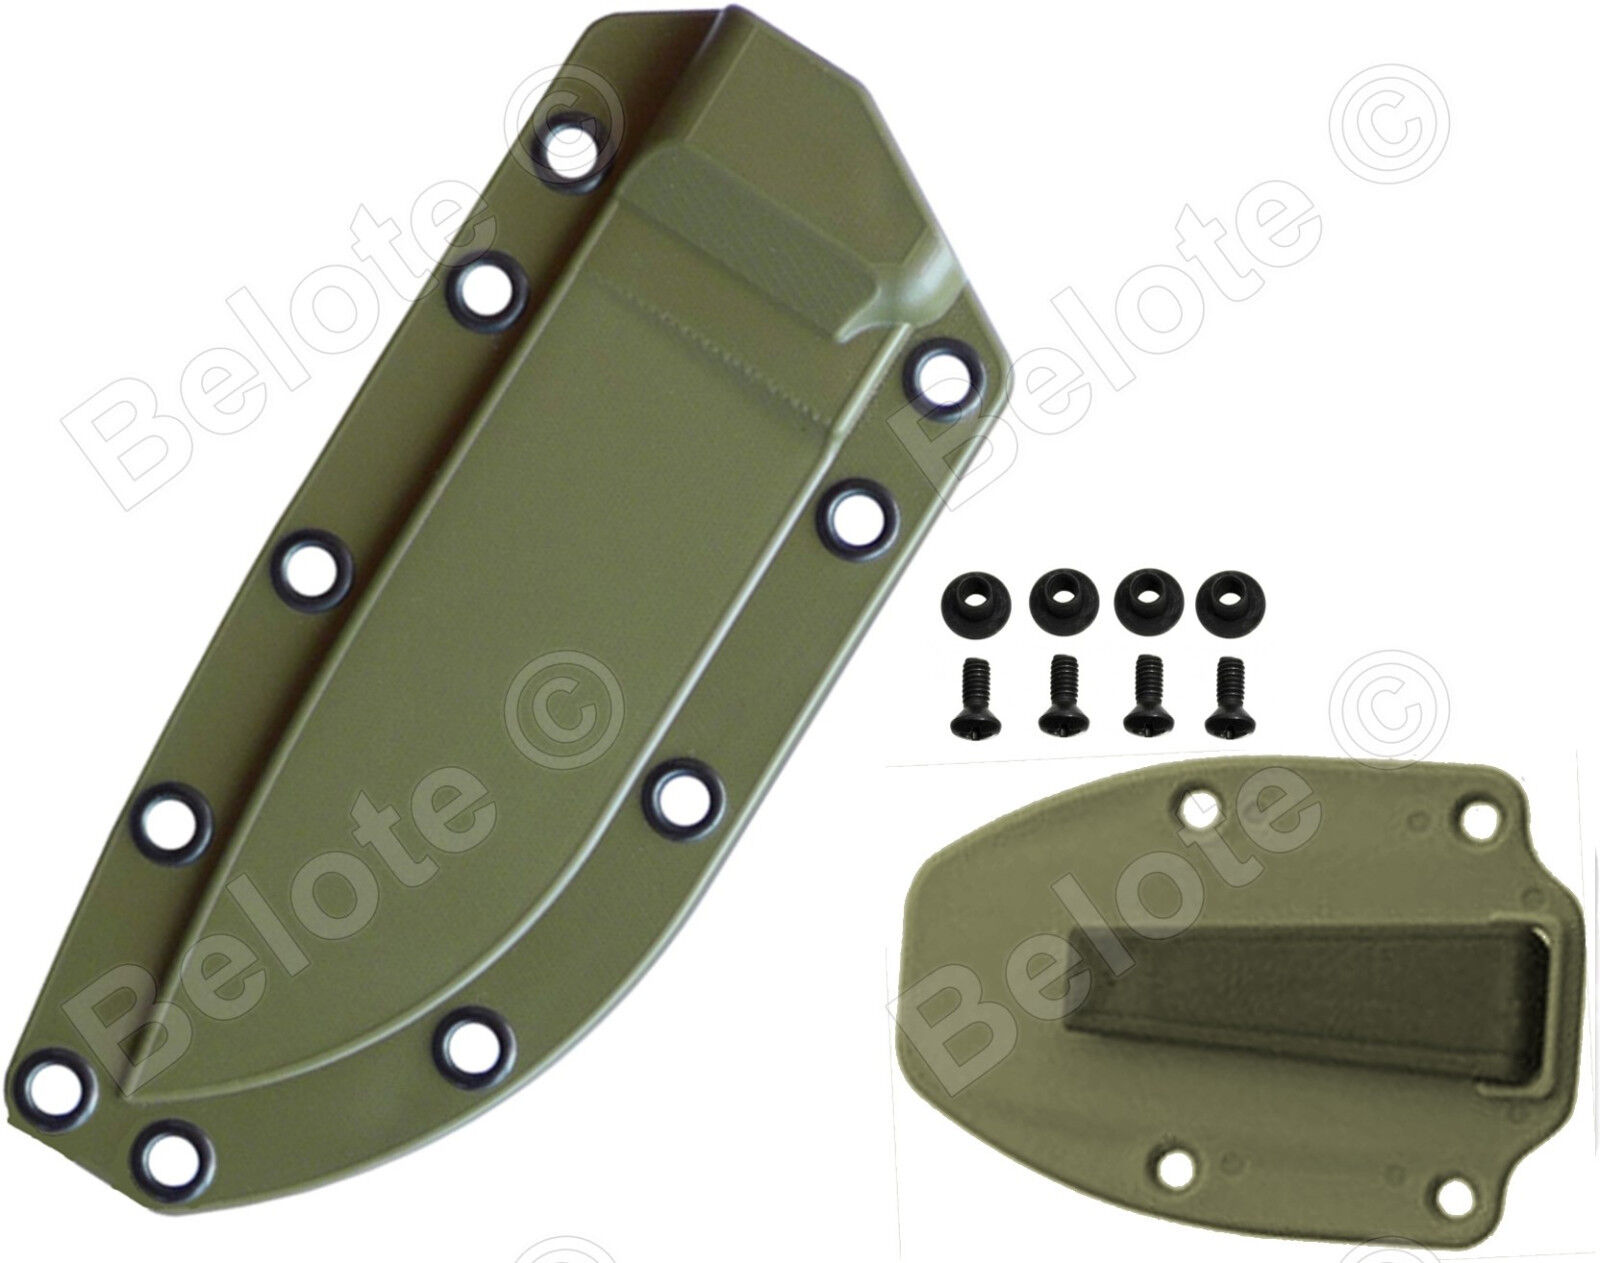 ESEE Model 4 Foliage Green OD, Molded Sheath With Clip Plate, ESEE-4-MSOD-CP NEW